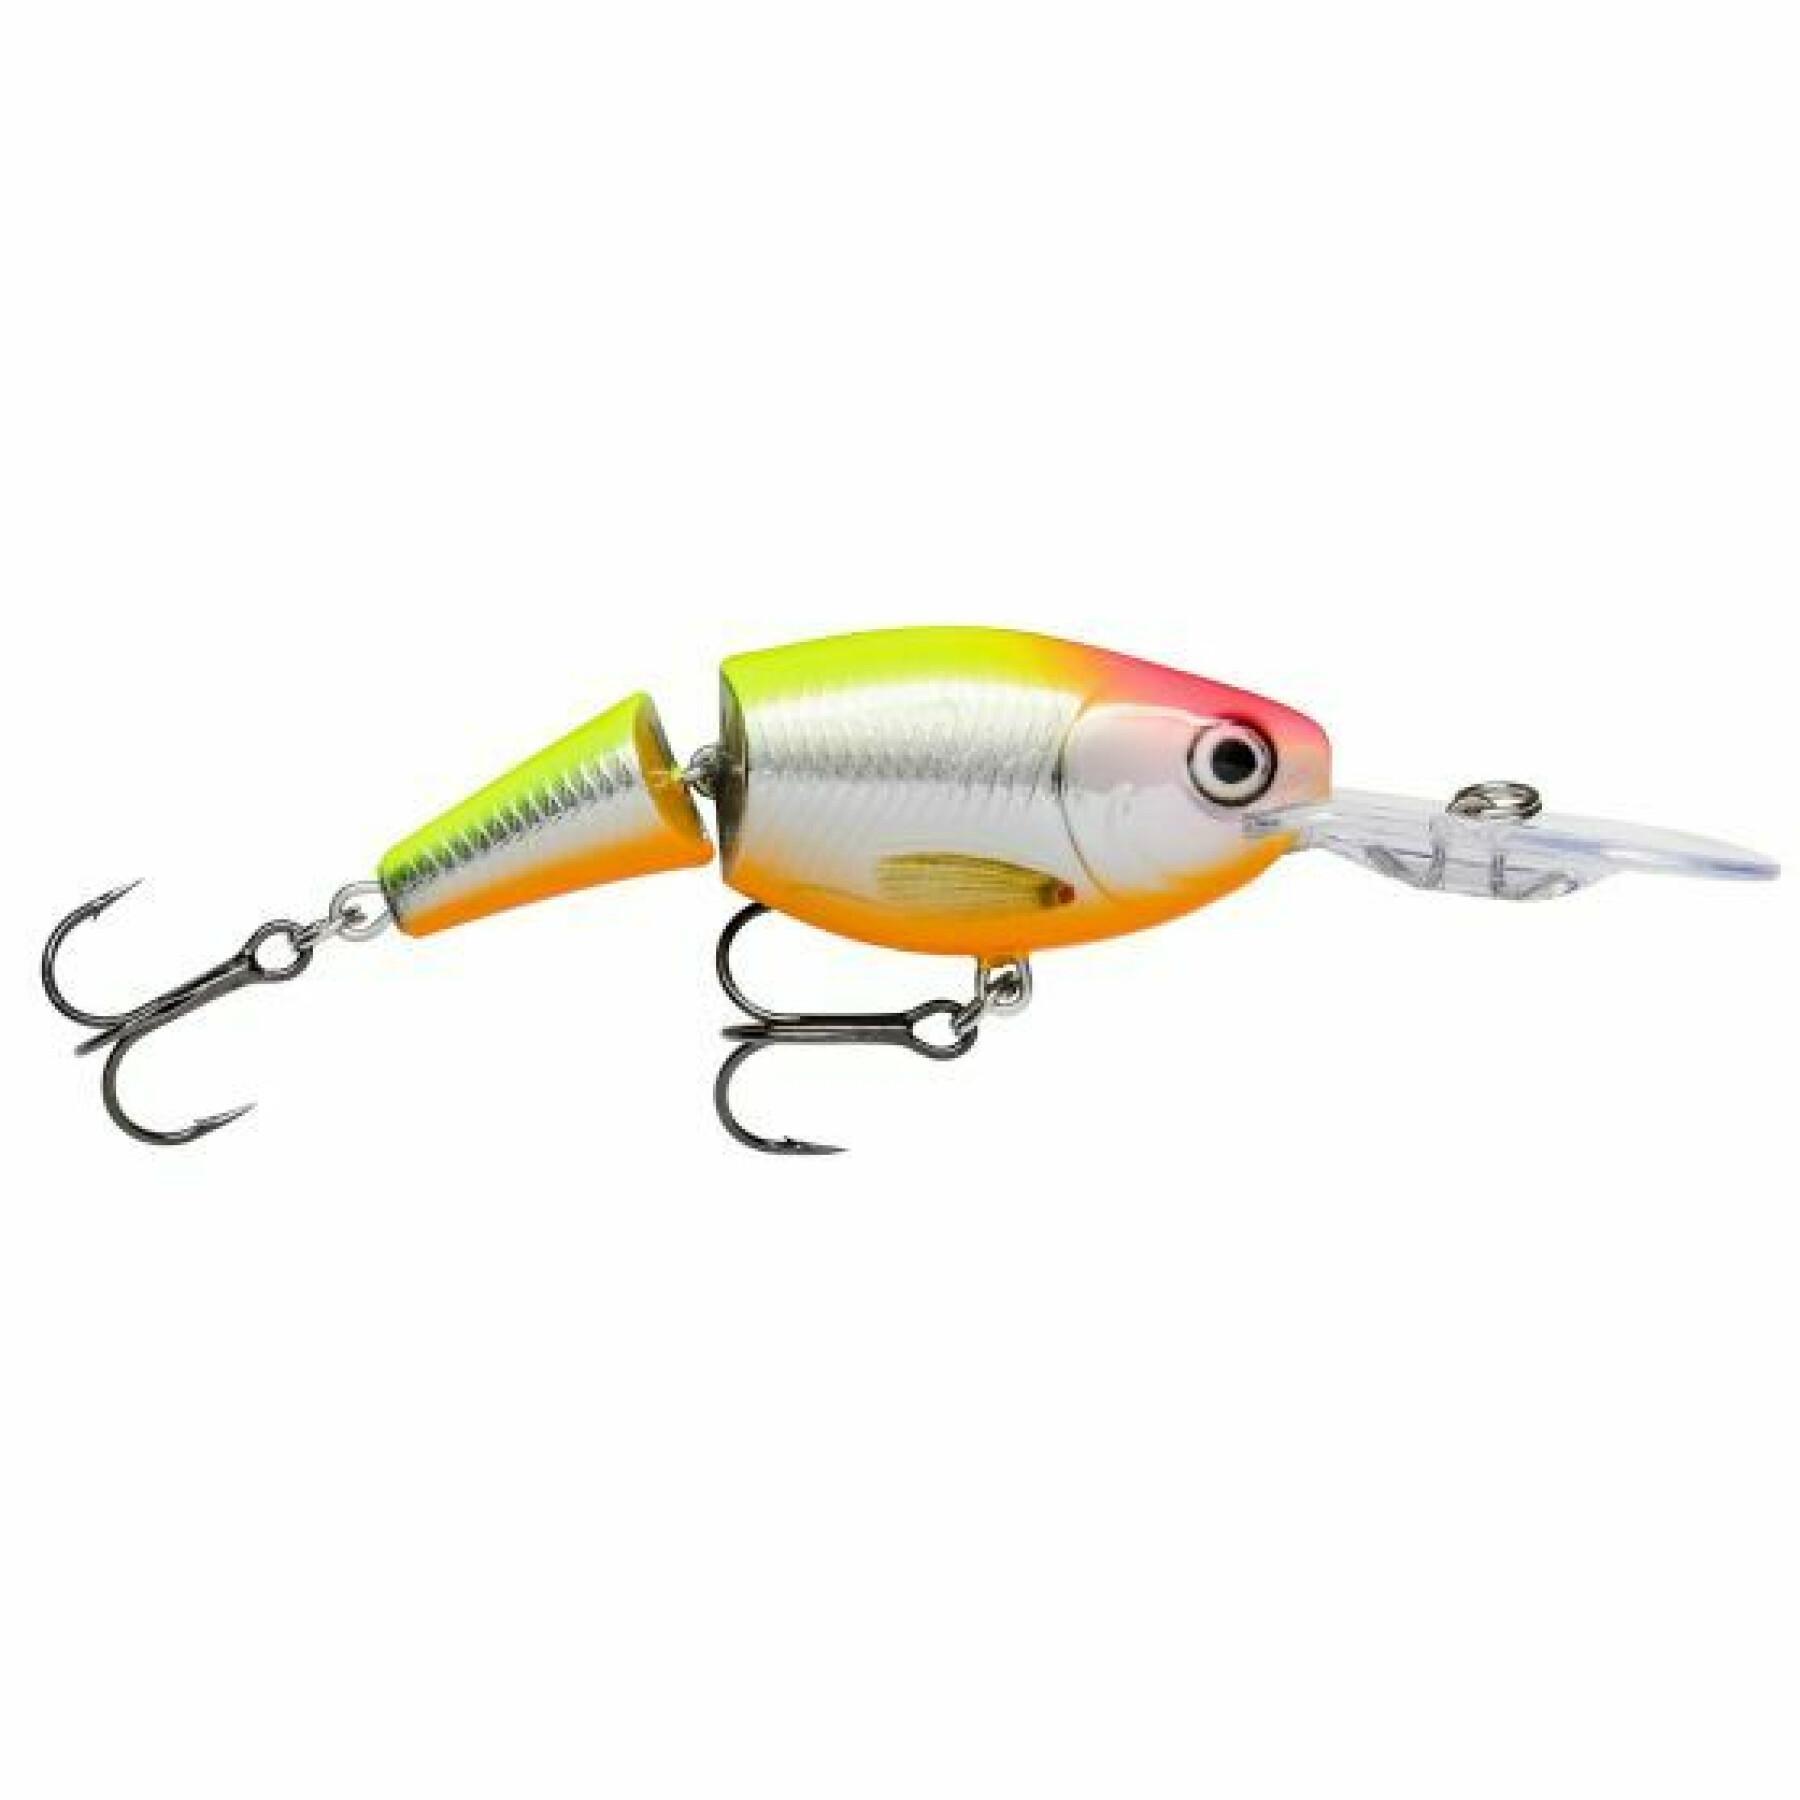 Suspending lure Rapala jointed shad rap 9 cm